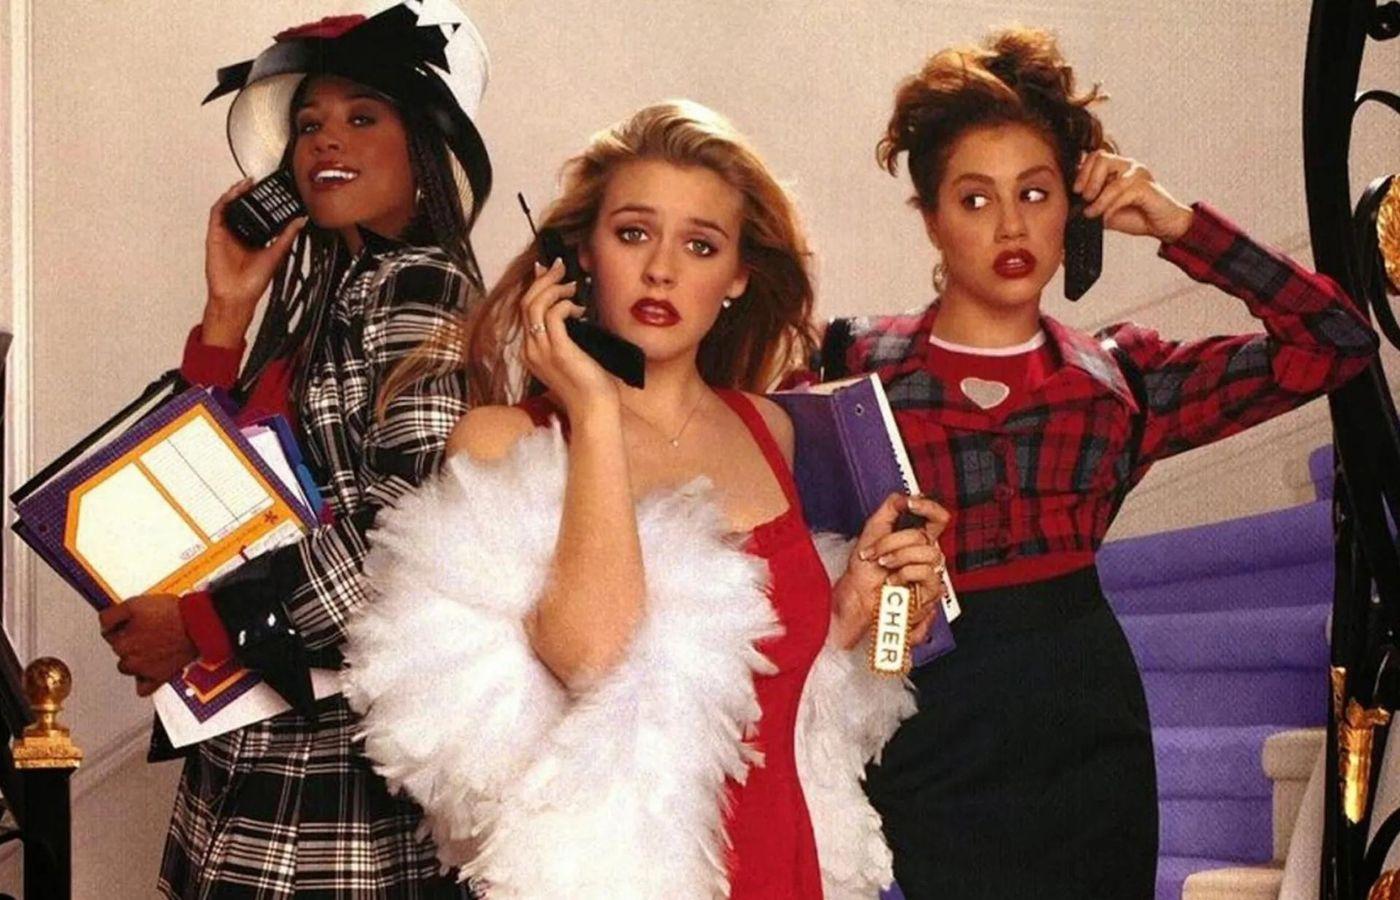 The poster for the 1995 film Clueless